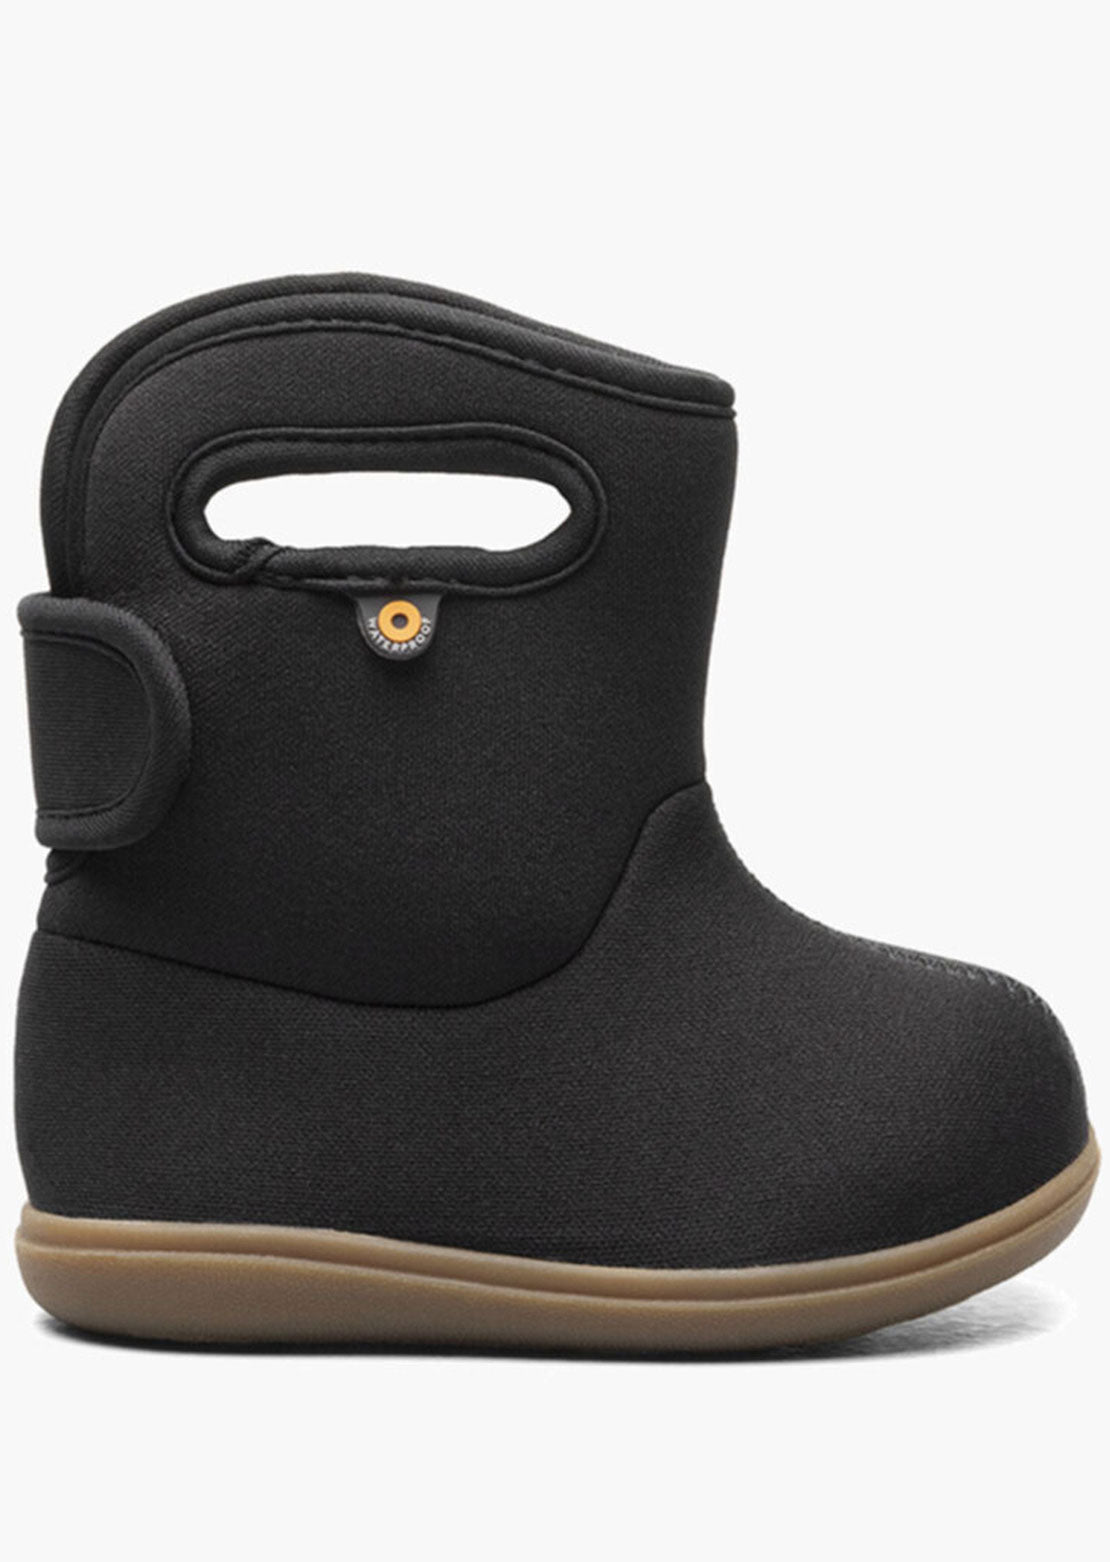 Bogs Toddler II Solid Boots Black Multi